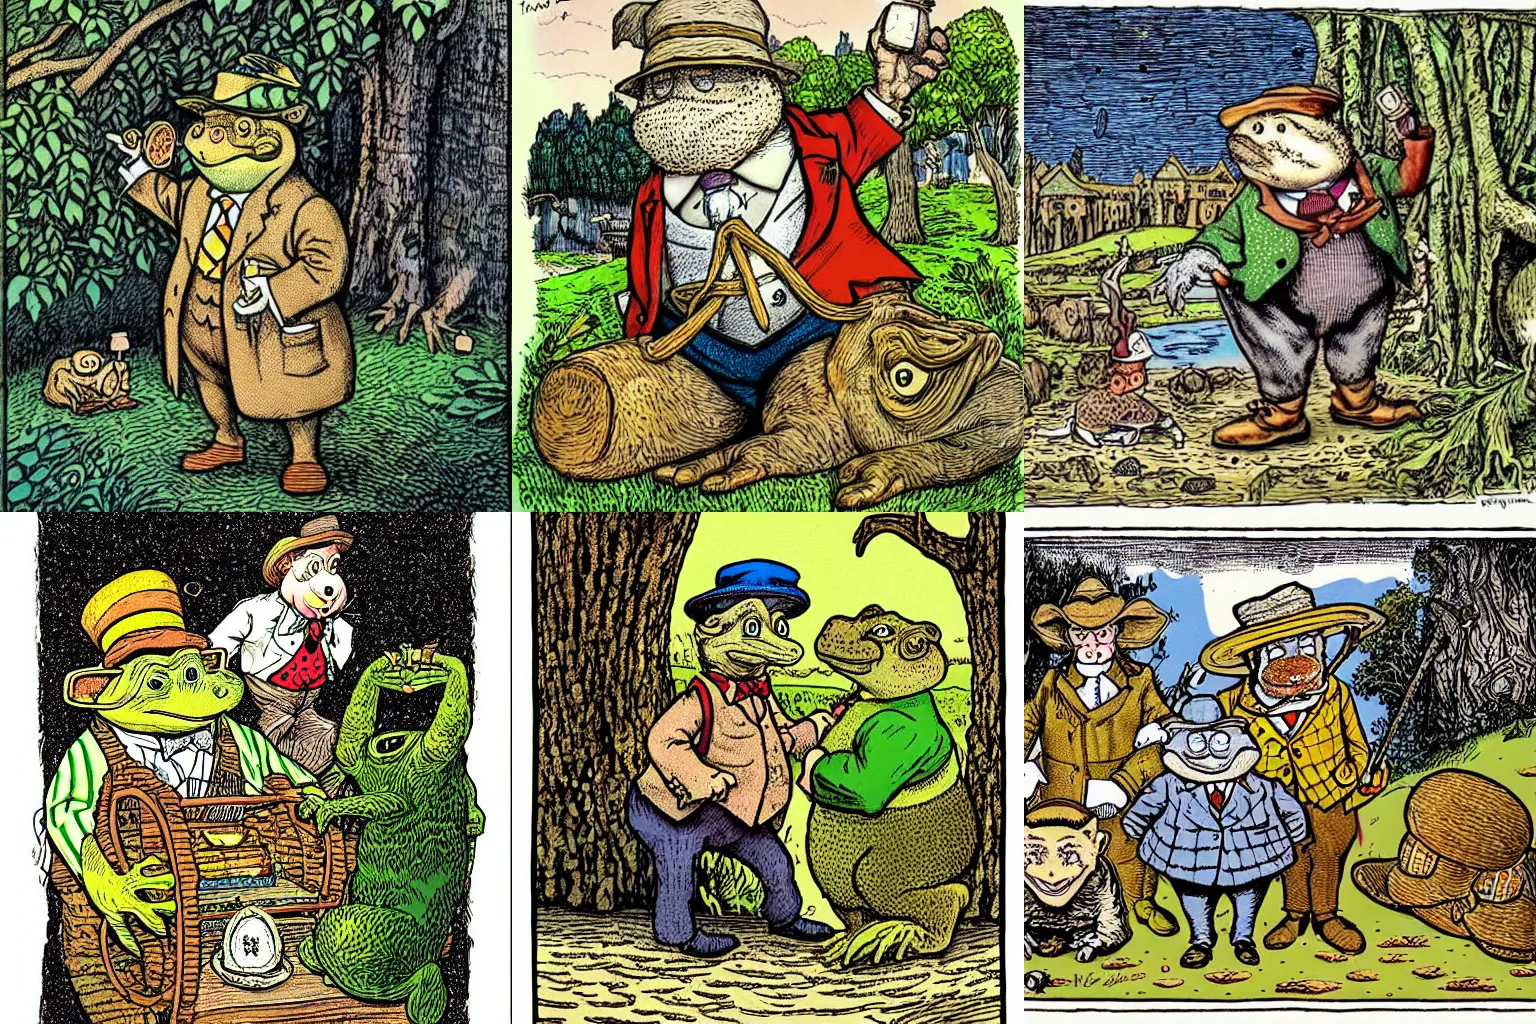 Prompt: “toad of toad hall from wind in the willows, coloured storybook illustration, by Robert crumb”